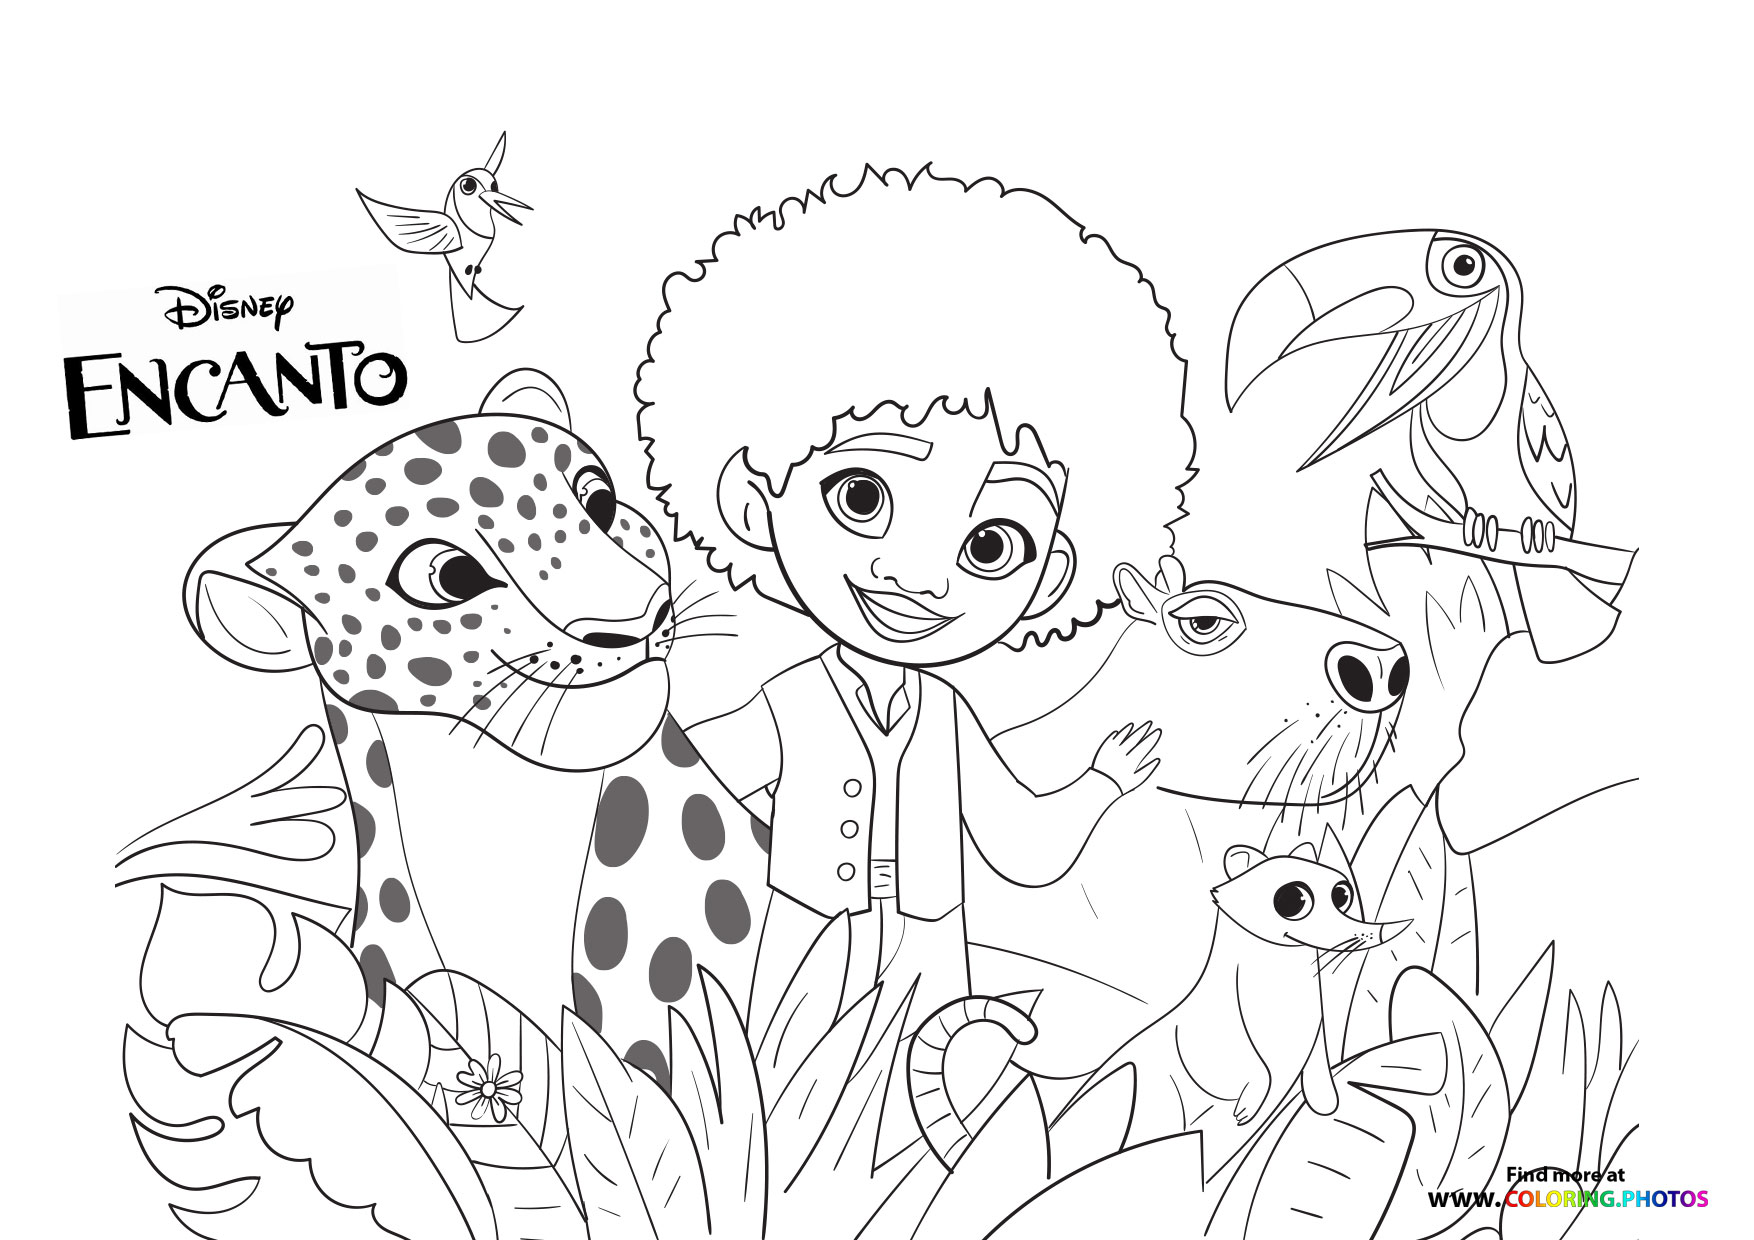 Encanto animals   Coloring Pages for kids